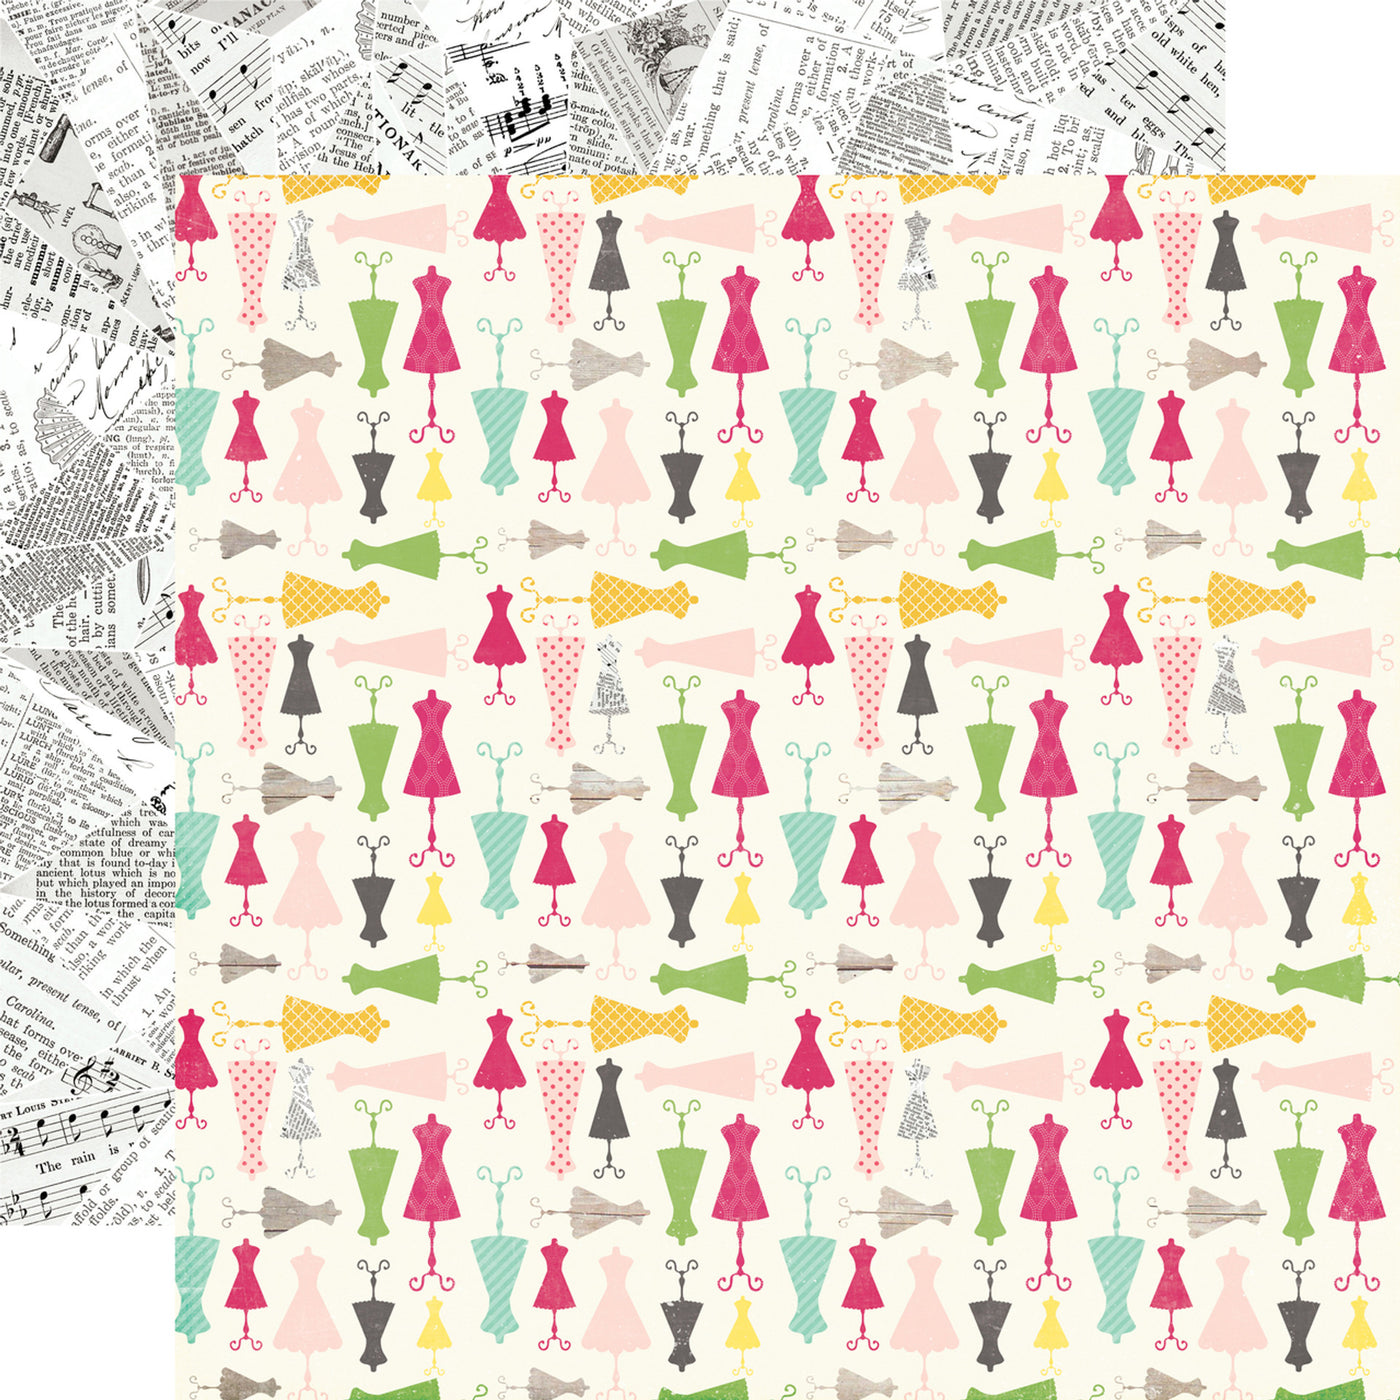 12x12 double-sided patterned paper - (green, hot pink, pink, yellow, and blue dress forms on an off-white background with black and white sewing patterns on a white background reverse)  - Echo Park Paper.